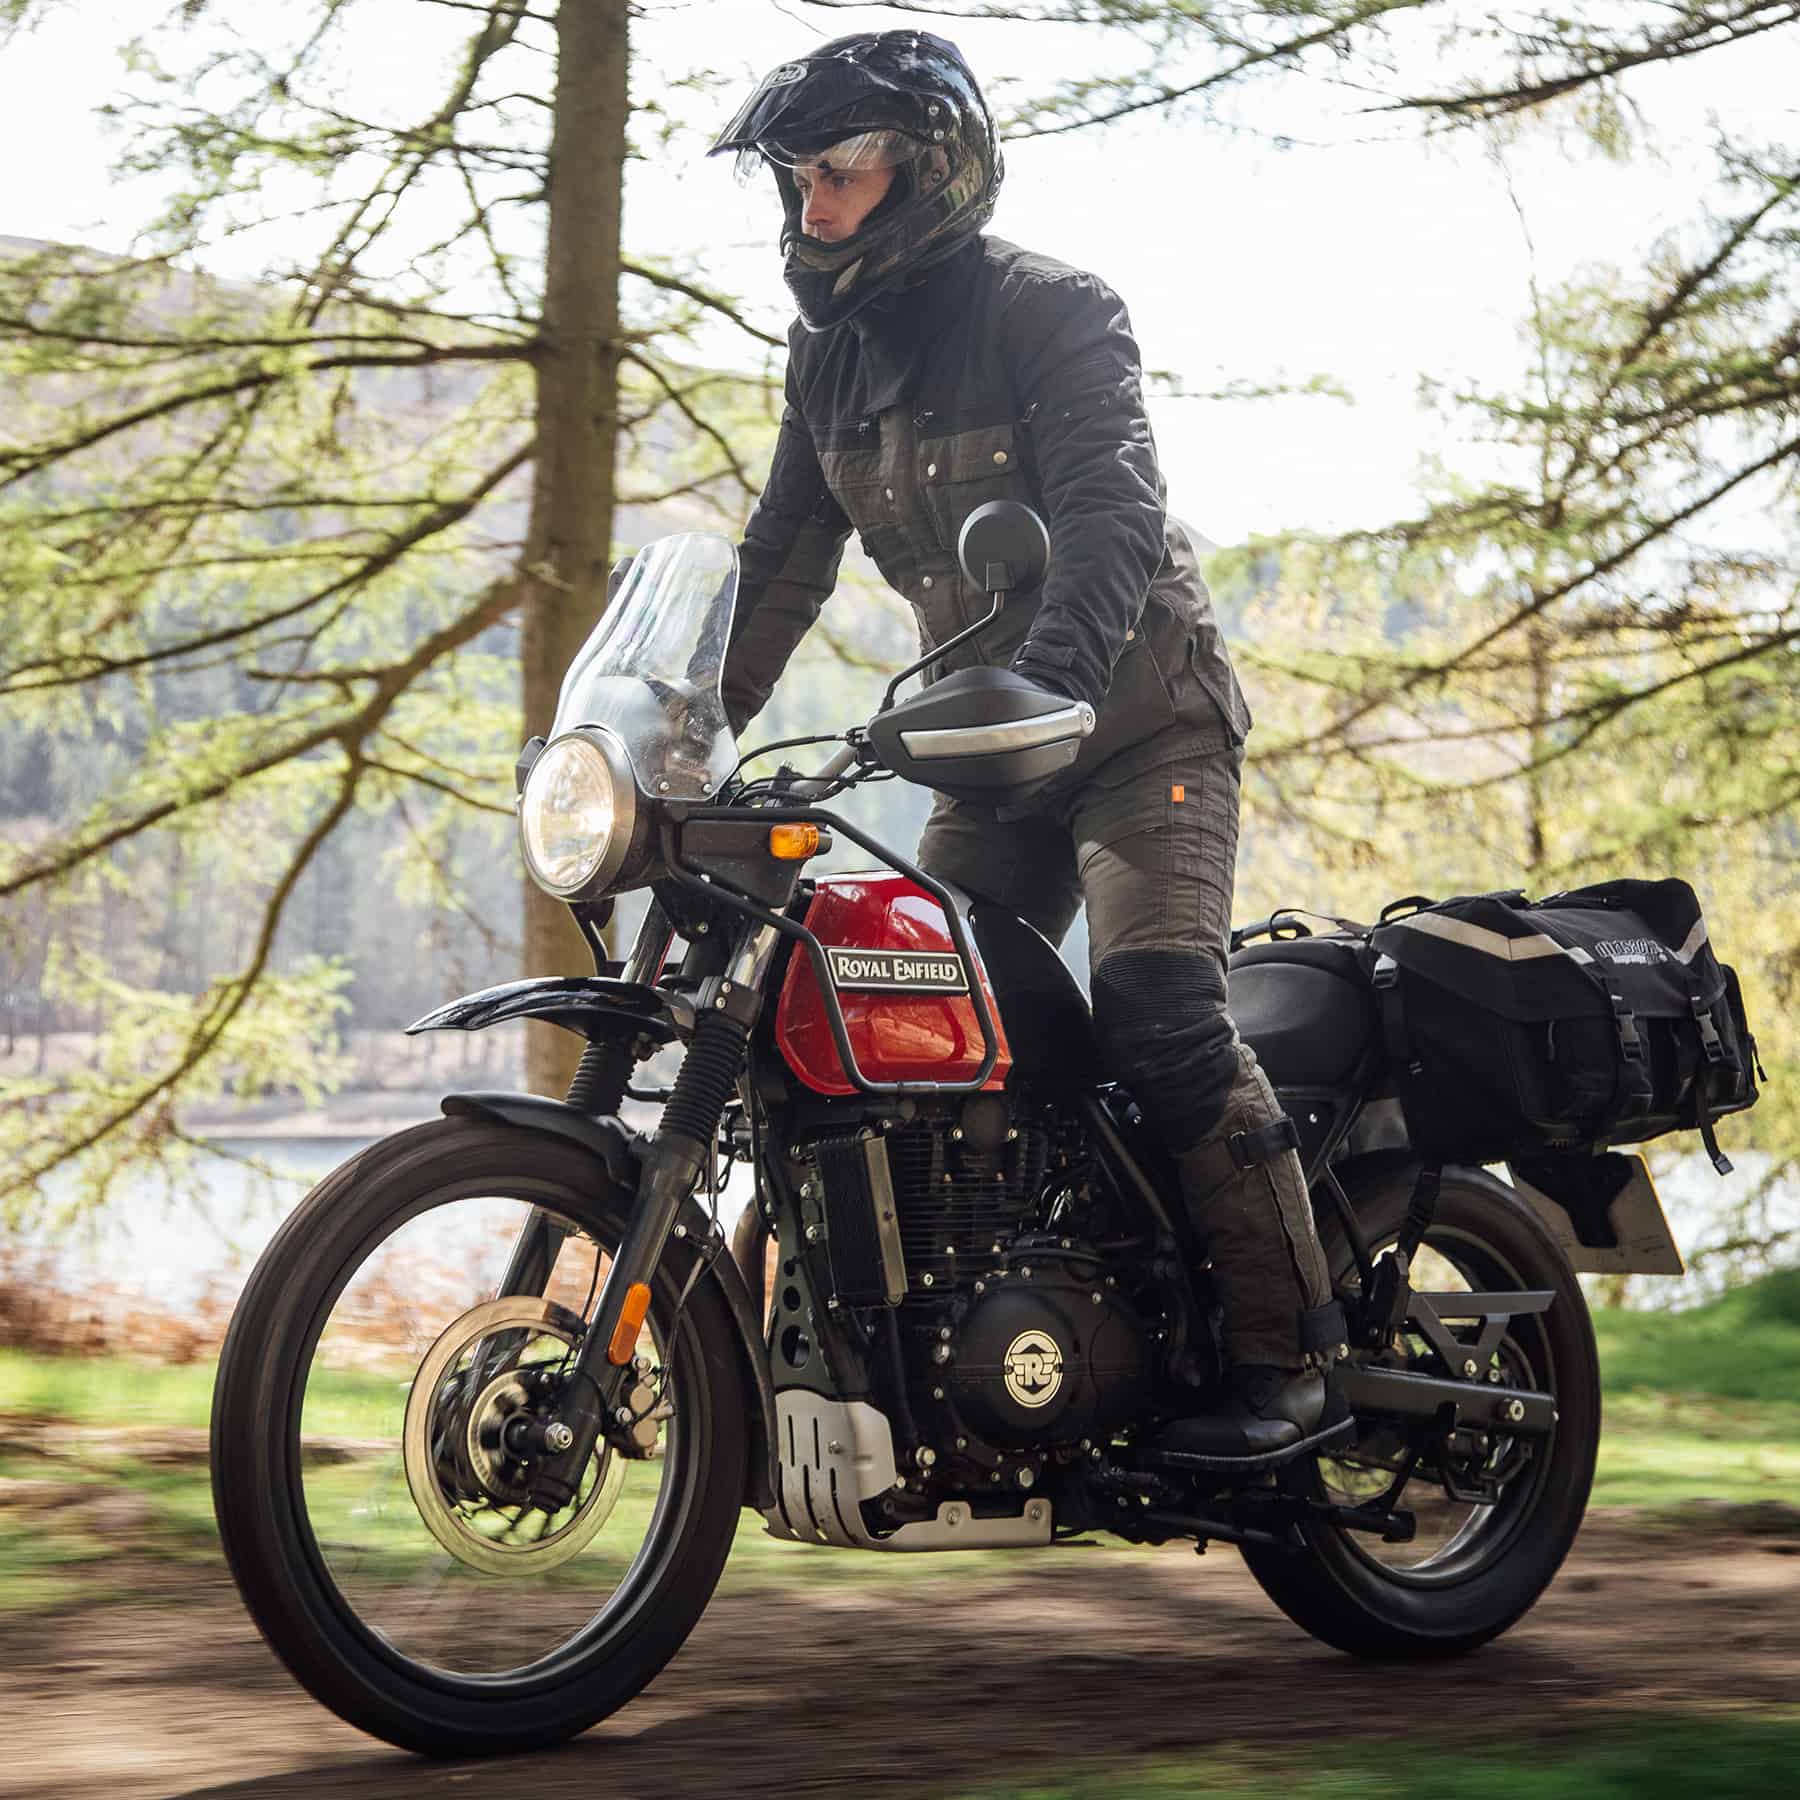 Riding image of Merlin Mahala Cordura jacket in black and olive